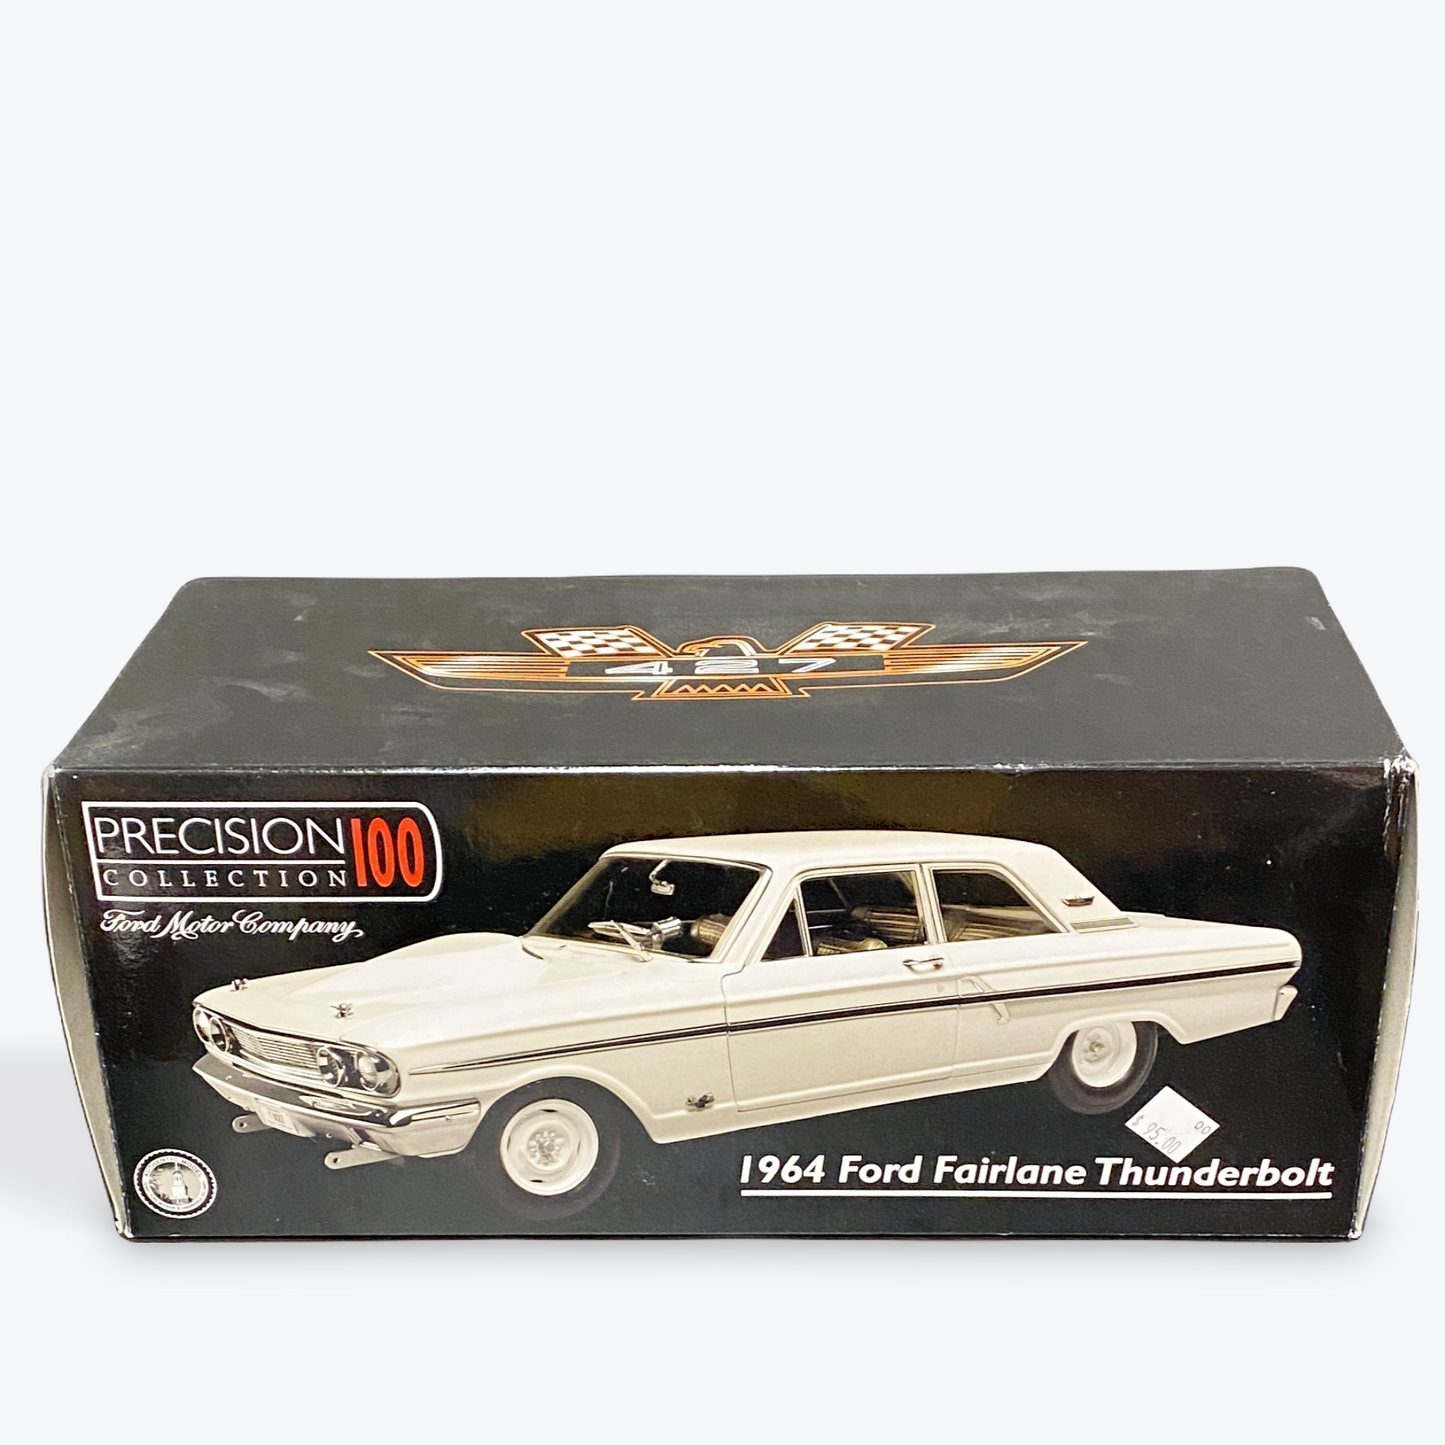 1/18 Scale 1964 Ford Fairlane Thunderbolt Factory Race Car/Precision Series 100 White - Ertl Collectibles